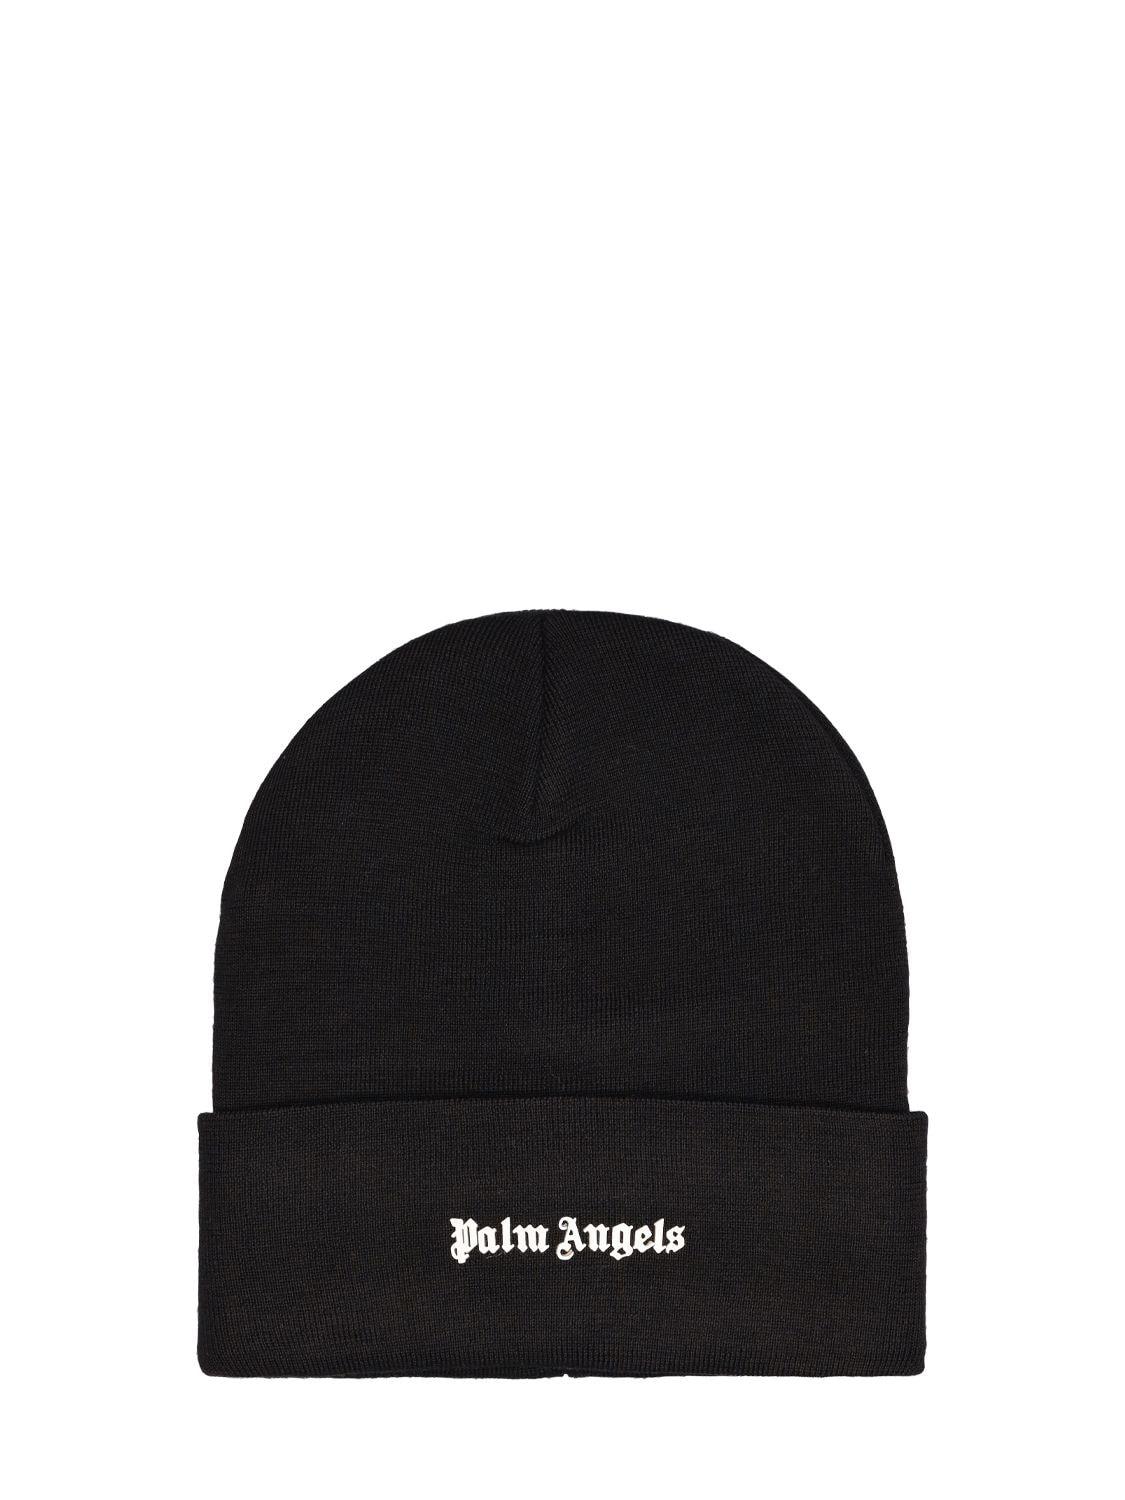 Monogram Beanie in black - Palm Angels® Official